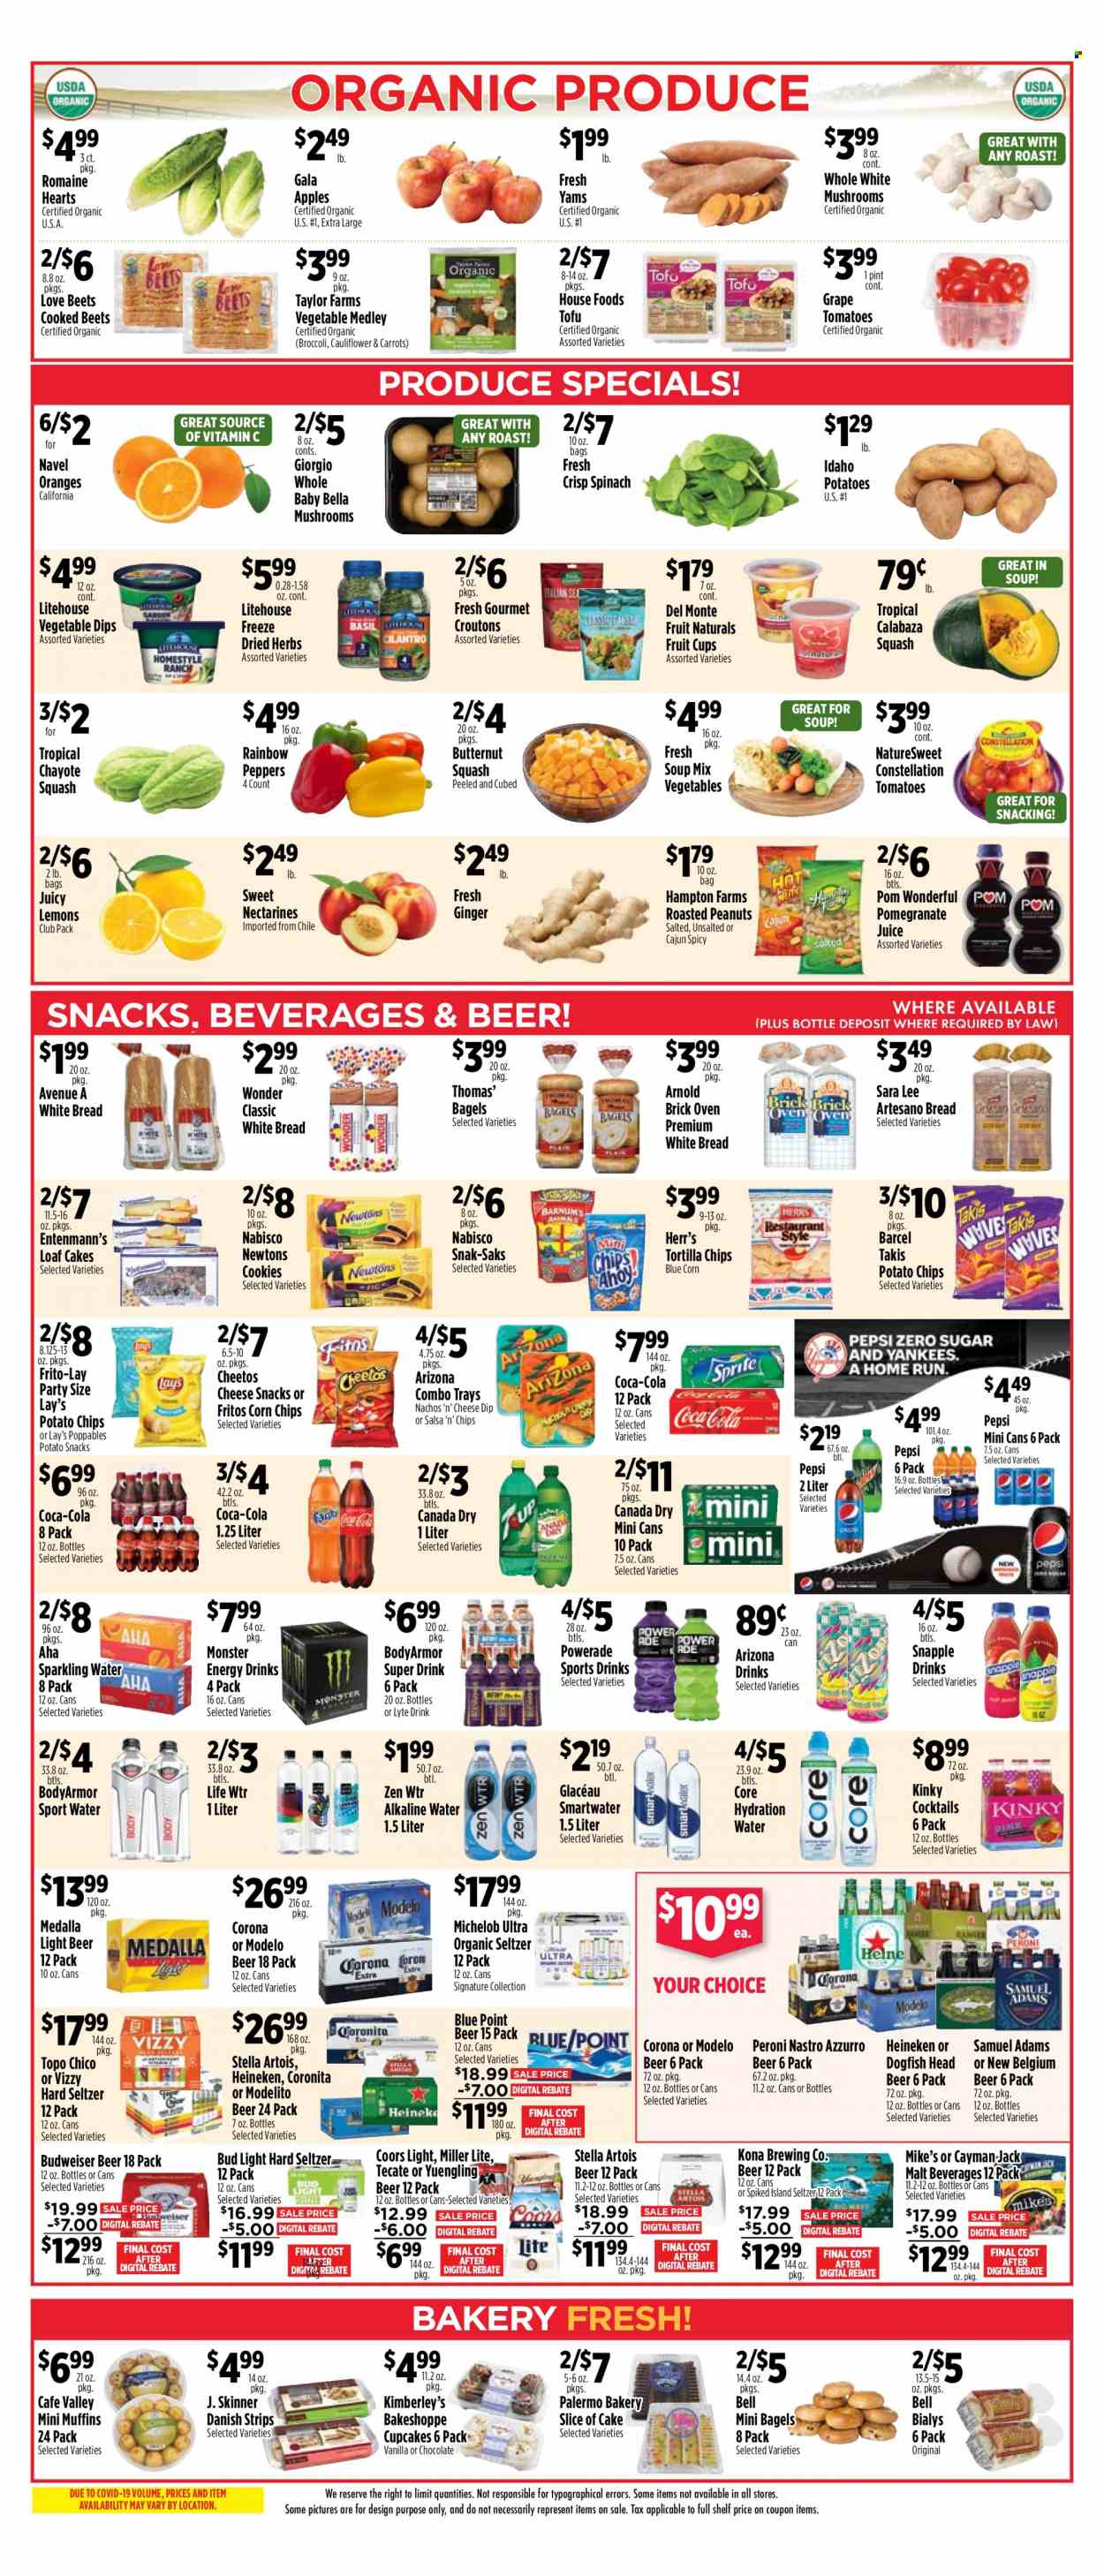 thumbnail - Pioneer Supermarkets Flyer - 03/26/2023 - 04/01/2023 - Sales products - mushrooms, bagels, bread, white bread, cake, Sara Lee, cupcake, muffin, Entenmann's, broccoli, butternut squash, carrots, ginger, tomatoes, peppers, chayote squash, apples, Gala, oranges, fruit cup, chayote, soup mix, soup, roast, tofu, dip, strips, cookies, snack, Fritos, tortilla chips, potato chips, Cheetos, chips, Lay’s, corn chips, Frito-Lay, croutons, malt, Del Monte, Skinner Pasta, salsa, roasted peanuts, peanuts, Canada Dry, Coca-Cola, Powerade, Pepsi, juice, energy drink, Monster, Monster Energy, AriZona, Snapple, sparkling water, Smartwater, alkaline water, water, Hard Seltzer, beer, Stella Artois, Bud Light, Corona Extra, Heineken, Peroni, Modelo, Budweiser, Miller Lite, nectarines, Coors, Yuengling, Michelob, pomegranate, lemons, navel oranges. Page 6.